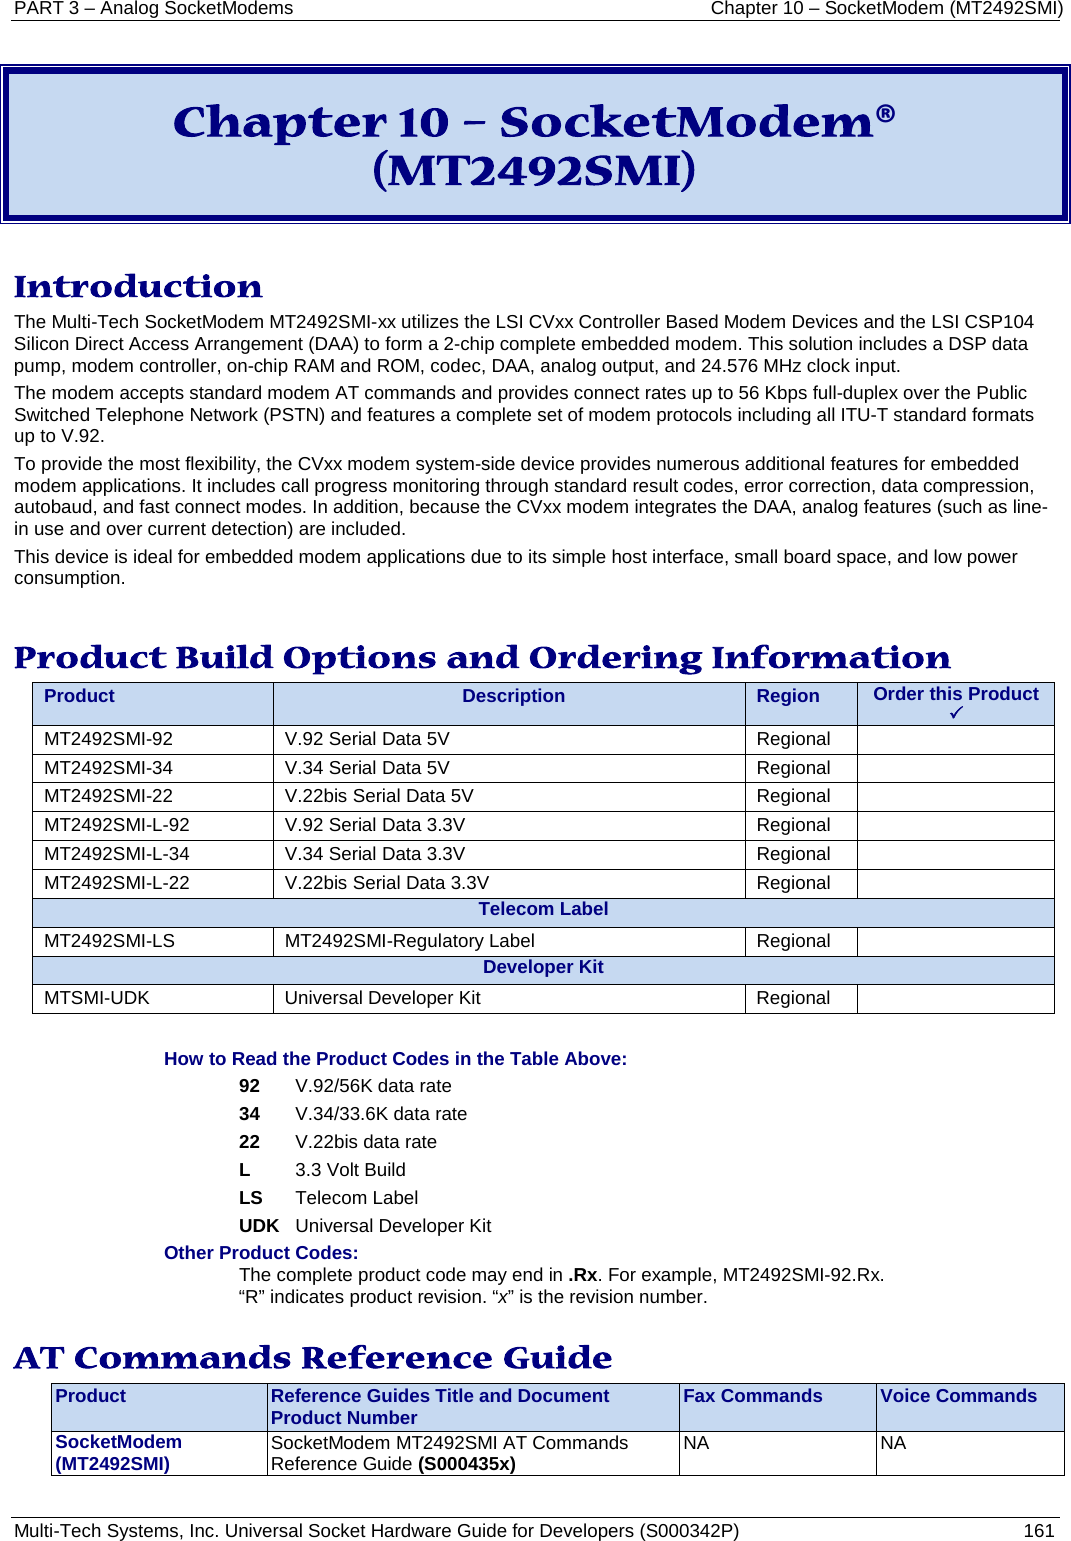 PART 3 – Analog SocketModems     Chapter 10 – SocketModem (MT2492SMI) Multi-Tech Systems, Inc. Universal Socket Hardware Guide for Developers (S000342P)  161   Chapter 10 – SocketModem® (MT2492SMI)  Introduction The Multi-Tech SocketModem MT2492SMI-xx utilizes the LSI CVxx Controller Based Modem Devices and the LSI CSP104 Silicon Direct Access Arrangement (DAA) to form a 2-chip complete embedded modem. This solution includes a DSP data pump, modem controller, on-chip RAM and ROM, codec, DAA, analog output, and 24.576 MHz clock input.  The modem accepts standard modem AT commands and provides connect rates up to 56 Kbps full-duplex over the Public Switched Telephone Network (PSTN) and features a complete set of modem protocols including all ITU-T standard formats up to V.92.  To provide the most flexibility, the CVxx modem system-side device provides numerous additional features for embedded modem applications. It includes call progress monitoring through standard result codes, error correction, data compression, autobaud, and fast connect modes. In addition, because the CVxx modem integrates the DAA, analog features (such as line-in use and over current detection) are included.  This device is ideal for embedded modem applications due to its simple host interface, small board space, and low power consumption.   Product Build Options and Ordering Information Product Description Region Order this Product   MT2492SMI-92 V.92 Serial Data 5V       Regional  MT2492SMI-34 V.34 Serial Data 5V       Regional  MT2492SMI-22 V.22bis Serial Data 5V       Regional  MT2492SMI-L-92 V.92 Serial Data 3.3V       Regional  MT2492SMI-L-34 V.34 Serial Data 3.3V       Regional  MT2492SMI-L-22 V.22bis Serial Data 3.3V        Regional  Telecom Label MT2492SMI-LS MT2492SMI-Regulatory Label Regional  Developer Kit MTSMI-UDK Universal Developer Kit Regional   How to Read the Product Codes in the Table Above: 92 V.92/56K data rate 34 V.34/33.6K data rate 22 V.22bis data rate L 3.3 Volt Build LS Telecom Label UDK Universal Developer Kit Other Product Codes: The complete product code may end in .Rx. For example, MT2492SMI-92.Rx.   “R” indicates product revision. “x” is the revision number.  AT Commands Reference Guide Product Reference Guides Title and Document Product Number Fax Commands Voice Commands SocketModem  (MT2492SMI) SocketModem MT2492SMI AT Commands Reference Guide (S000435x)  NA NA  